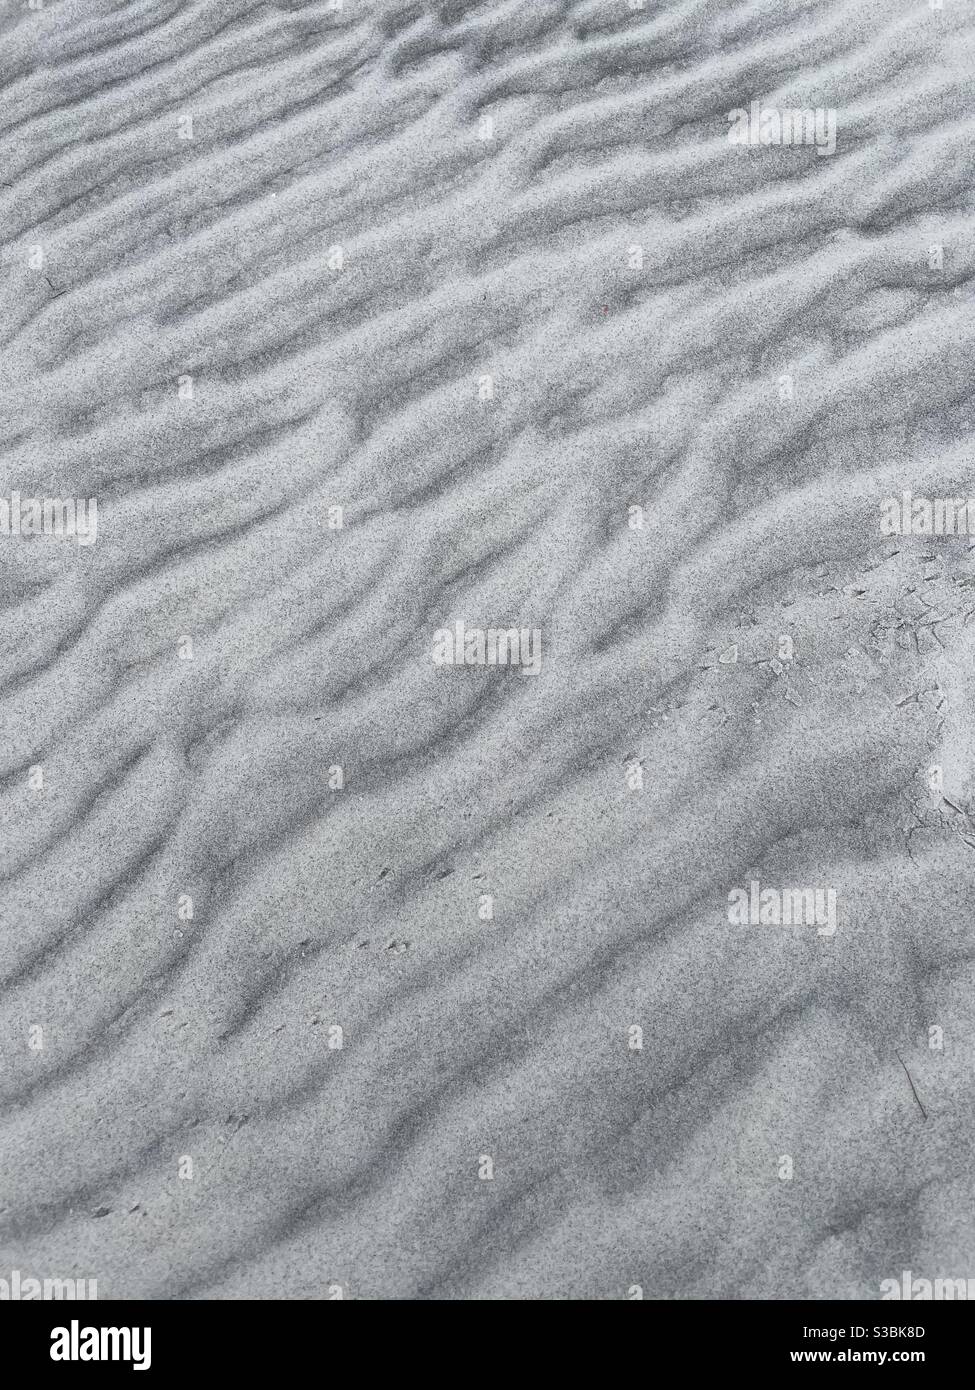 Abstract background of textures and patterns on white sand Stock Photo